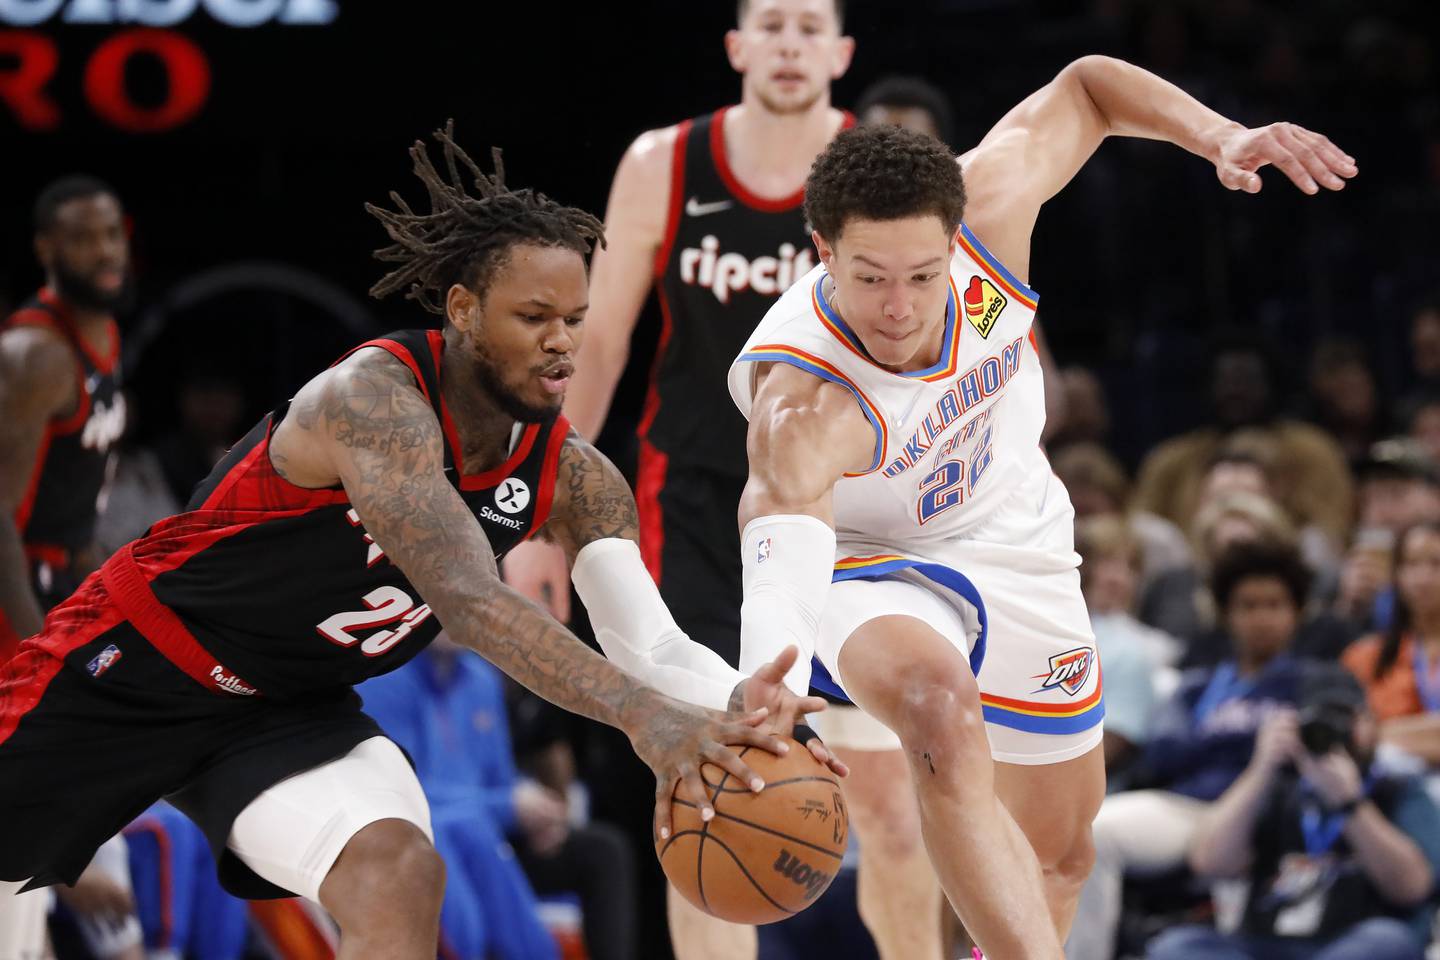 Portland Trail Blazers guard Ben McLemore (23) and Oklahoma City Thunder forward Isaiah Roby (22) battle for the ball during the second half Tuesday, April 5, 2022, in Oklahoma City. (AP Photo/Garett Fisbeck)